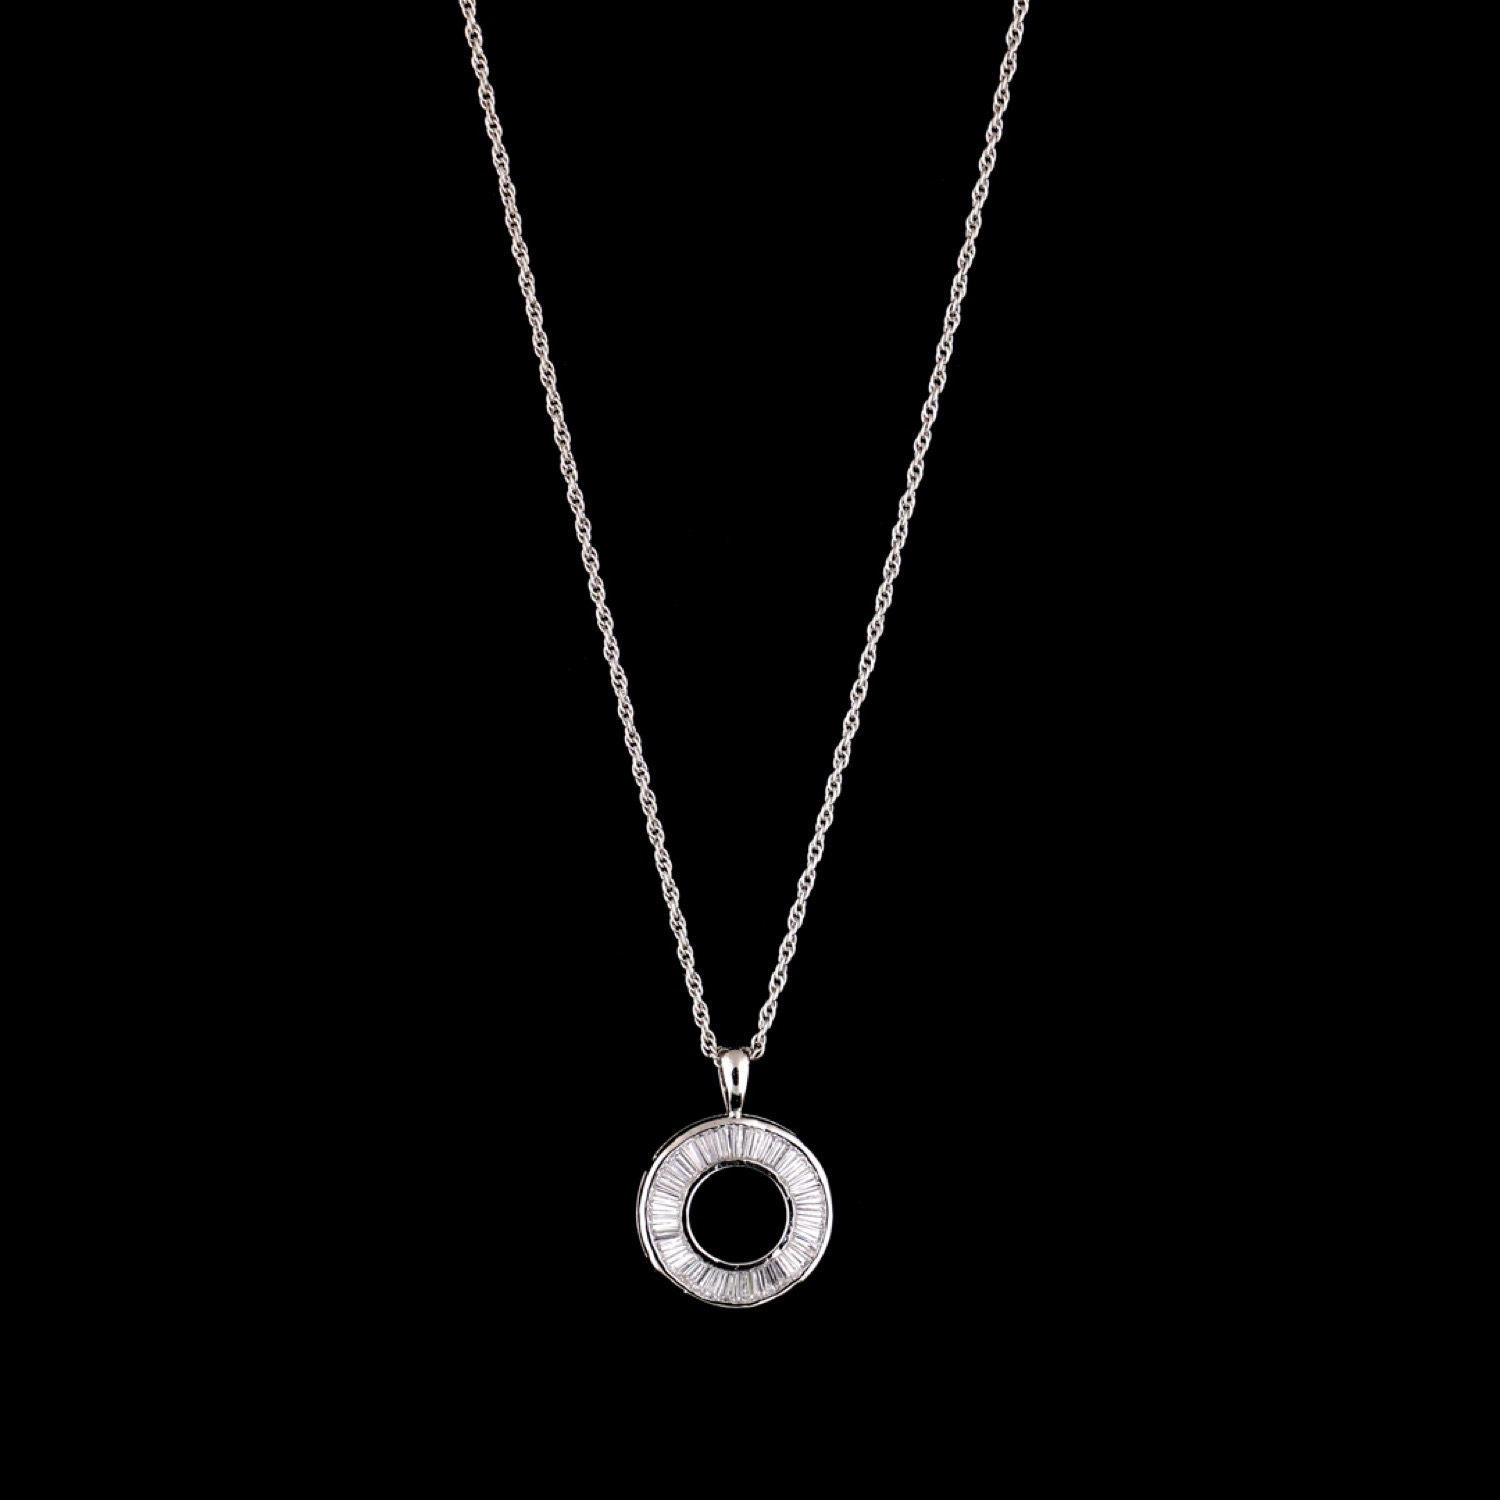 varam_chains_round_shaped_hollow_pendant_with_silver_chain-1